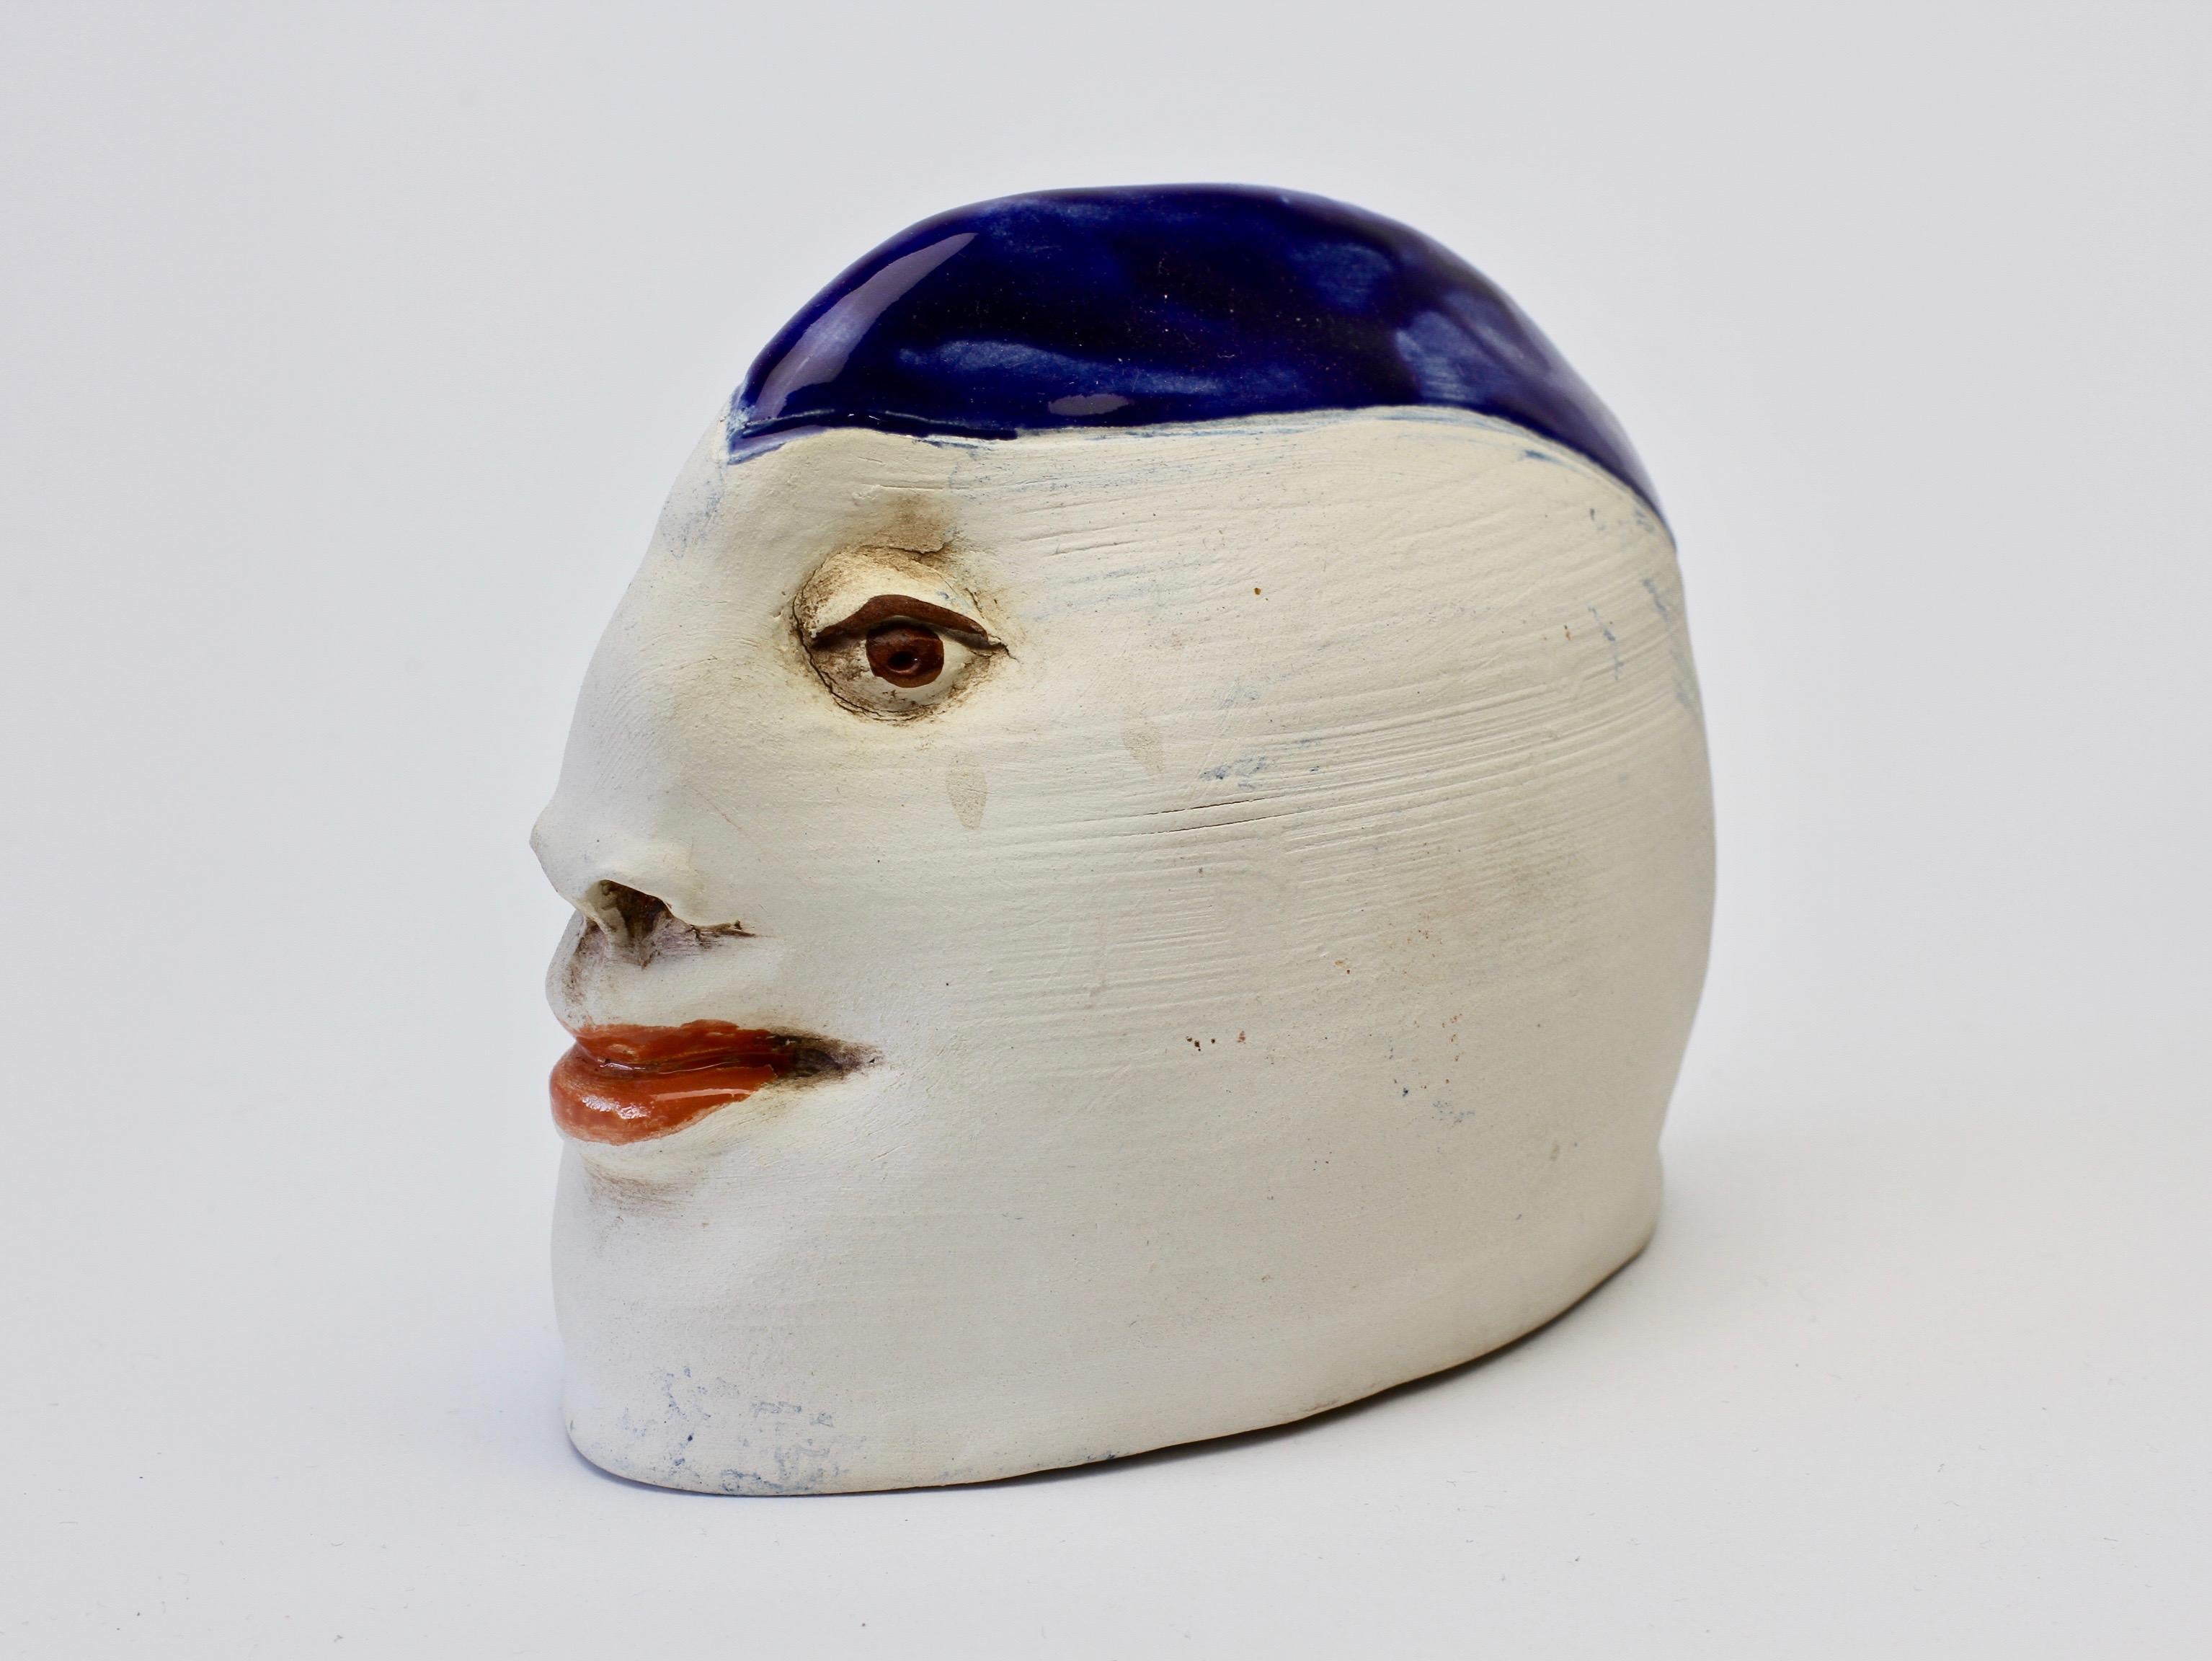 Ceramic Unusual Quirky Vintage Hand Thrown Glazed Pottery Sculpture of a Head with Face 